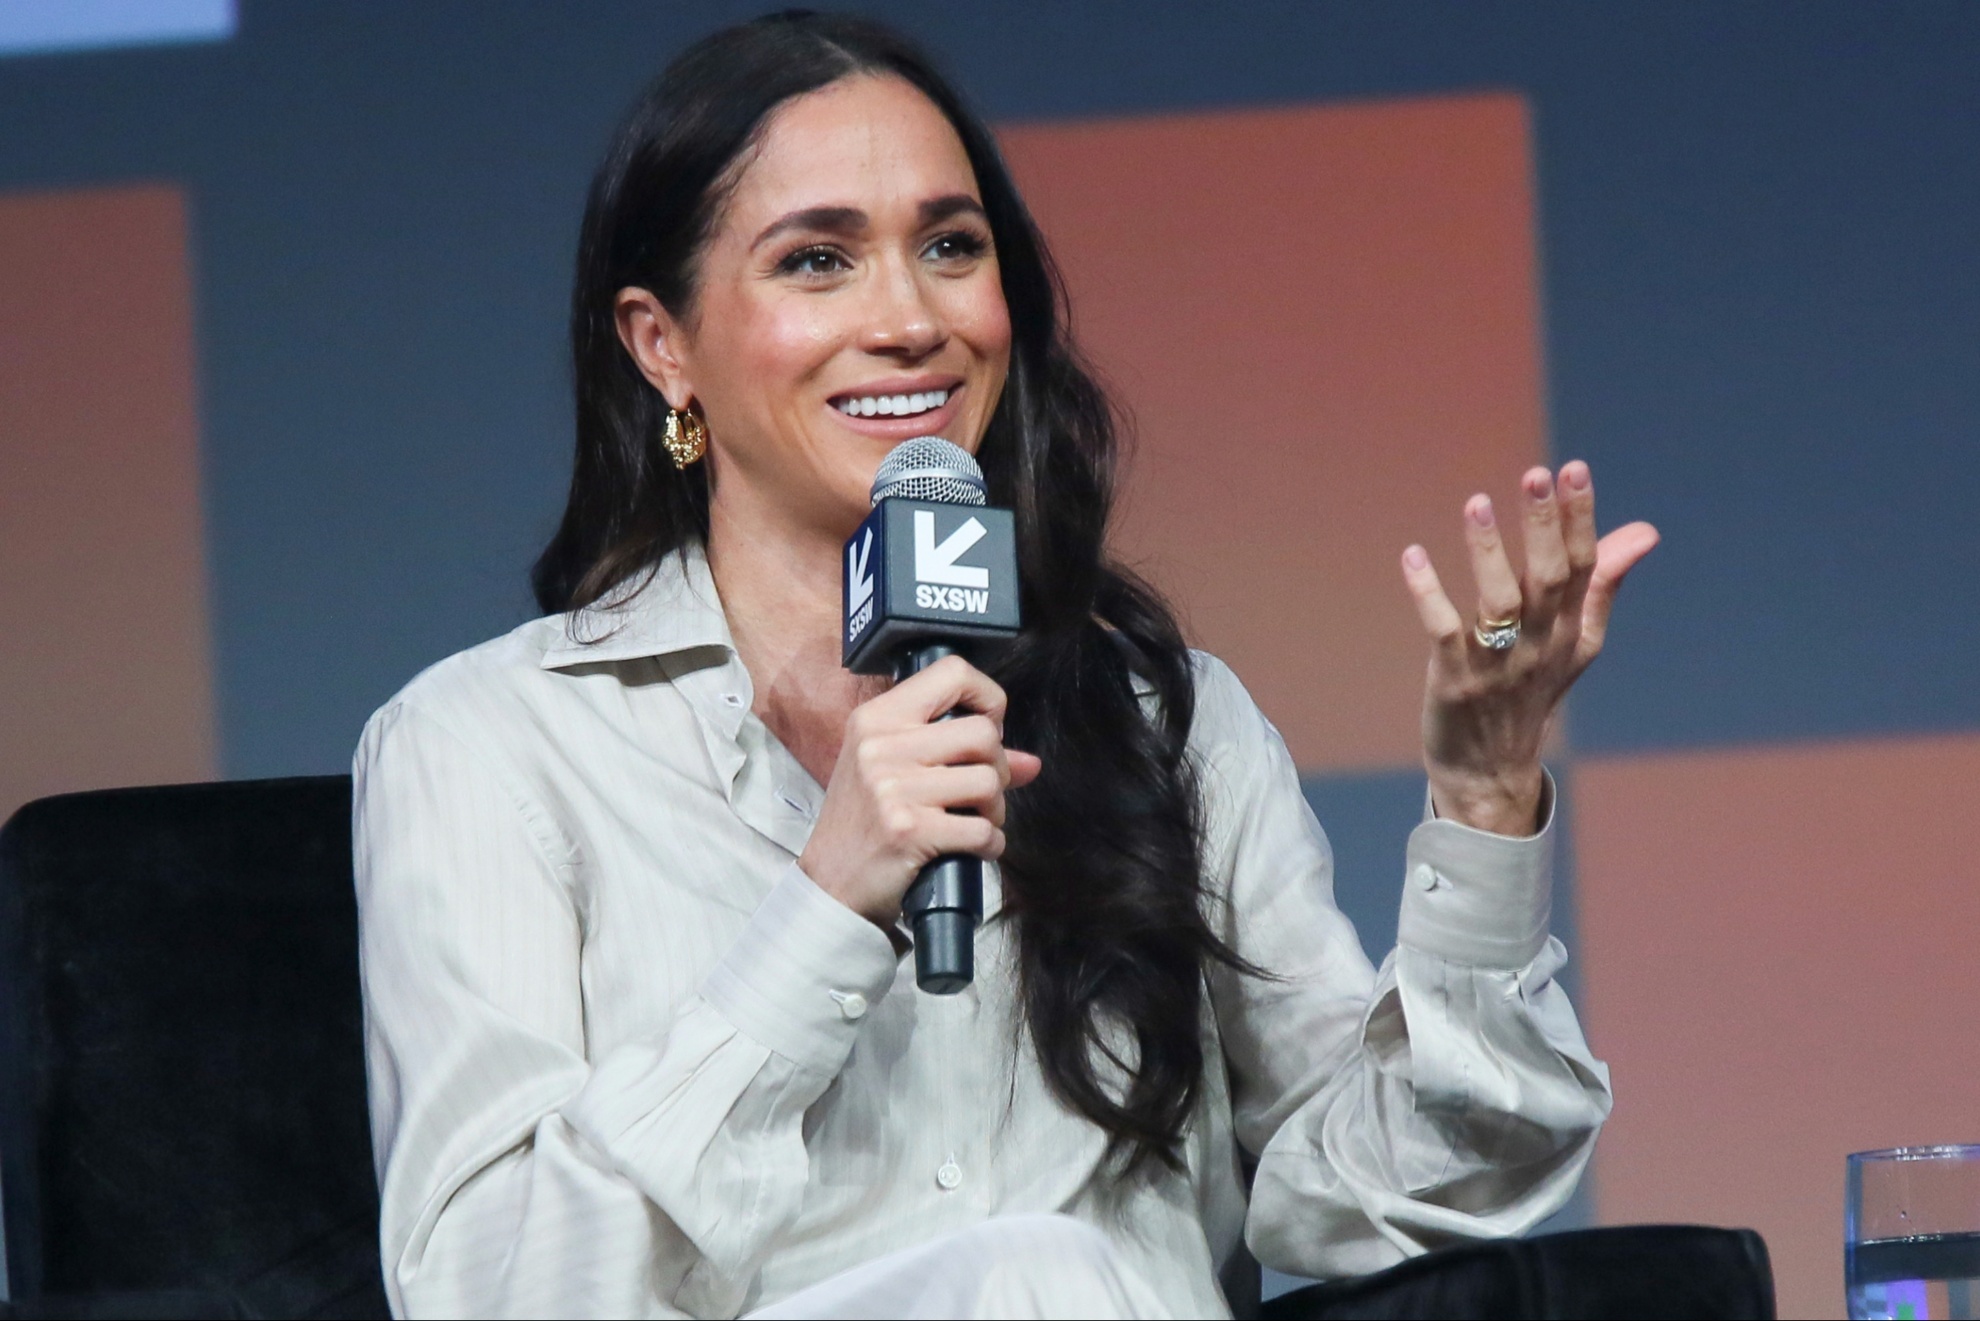 Meghan Markle recently launched her lifestyle brand.